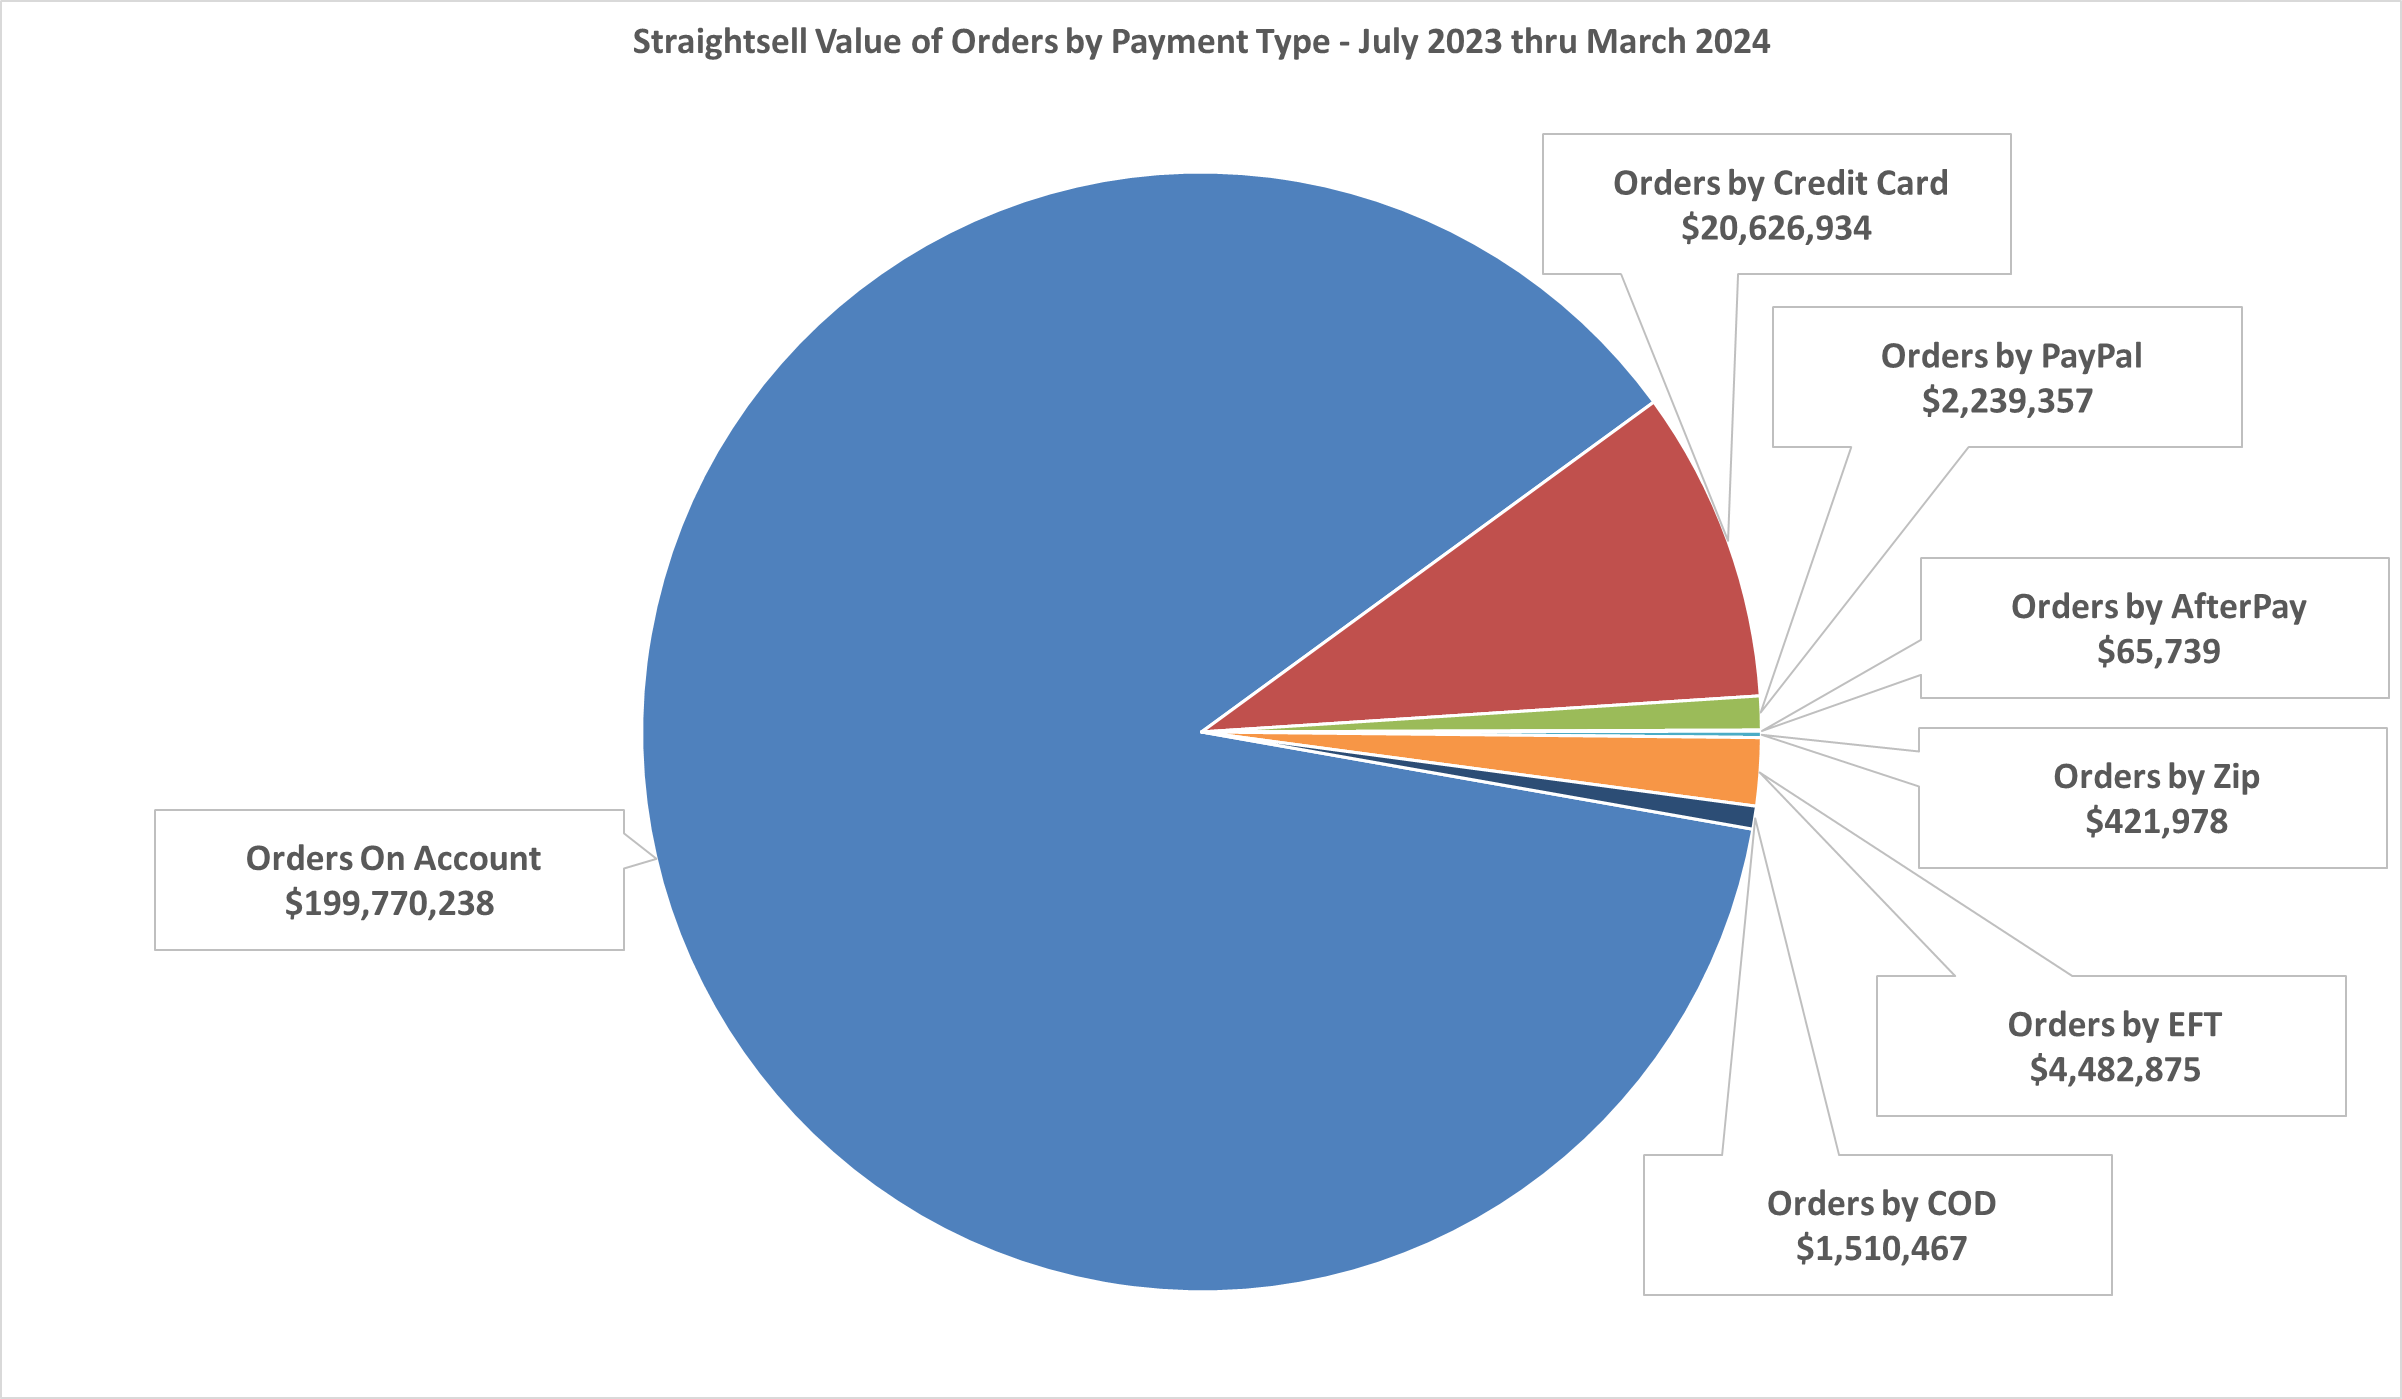 Straightsell Value of Orders by Payment Type - July 2023 thru March 2024